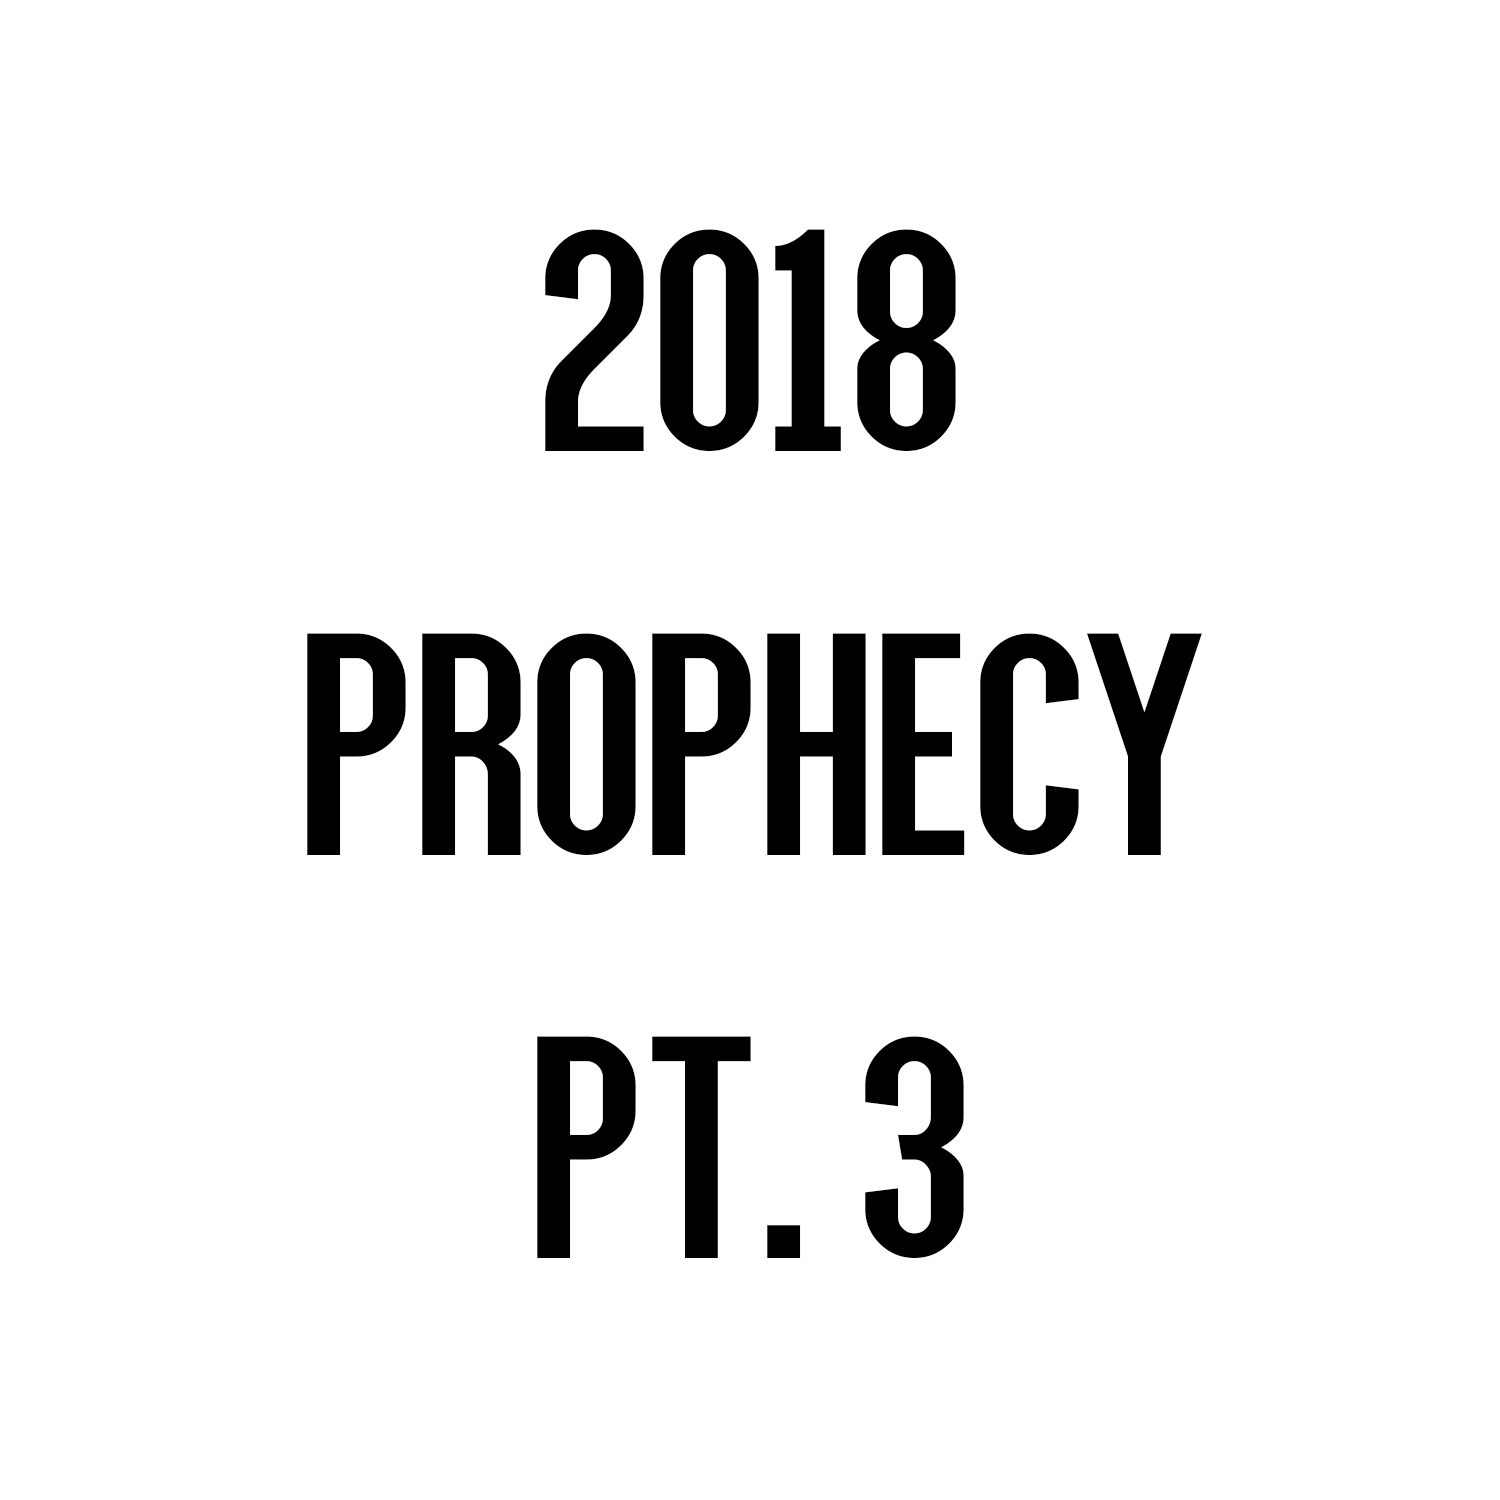 Johnny’s Prophetic Word for the New Year | Part 3 of 4